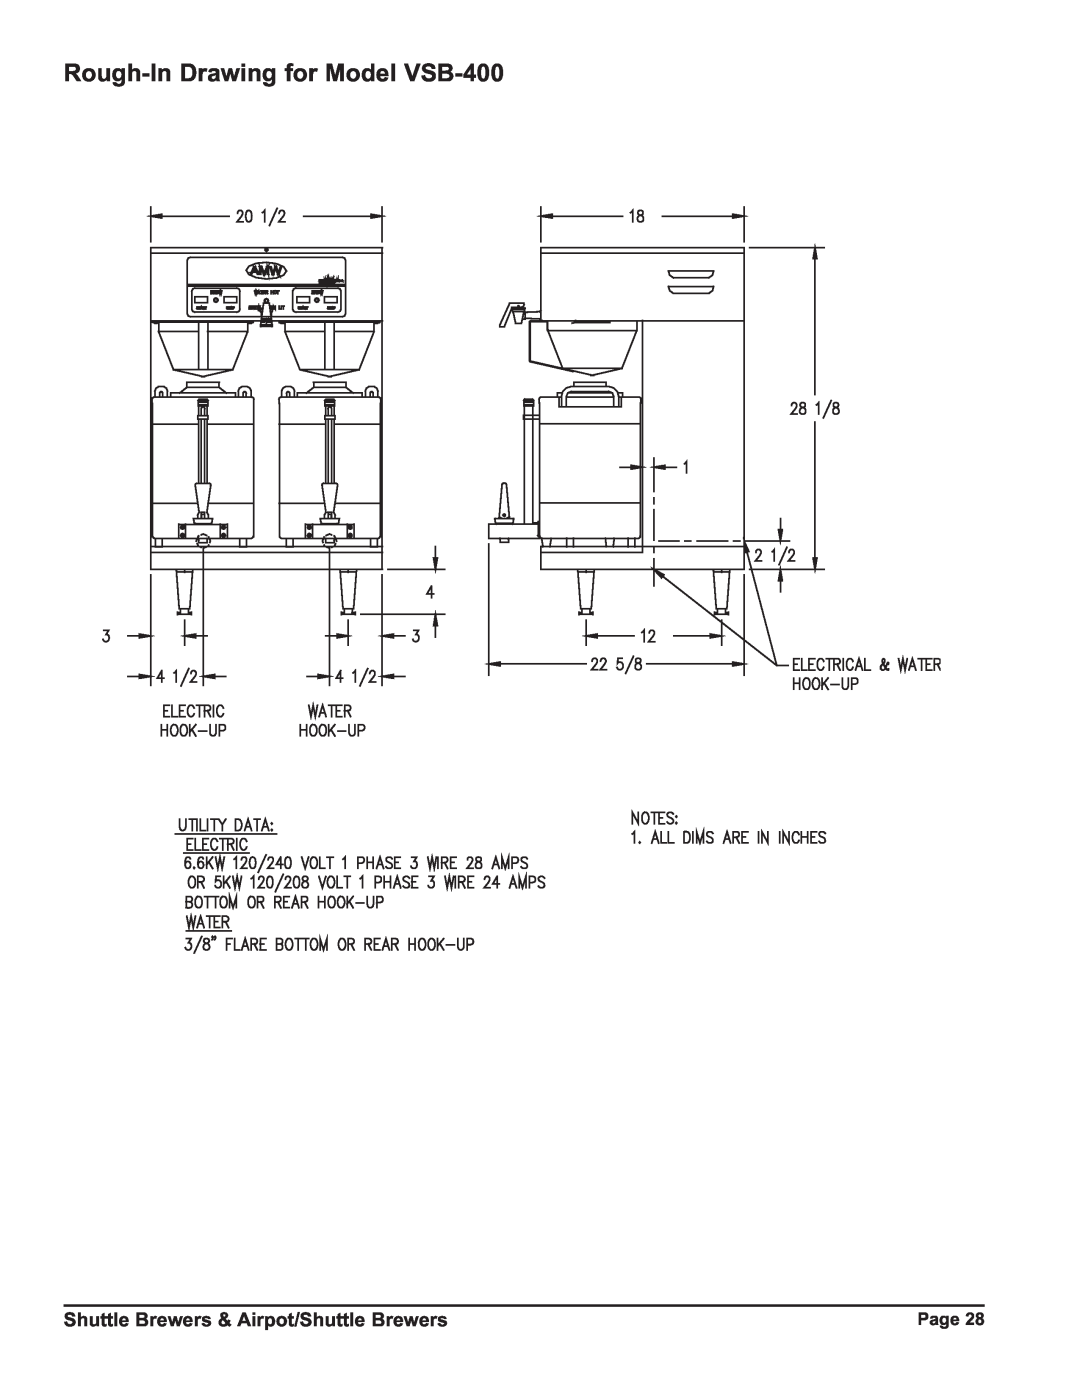 Grindmaster P400ESHP instruction manual Rough-In Drawing for Model VSB-400, Shuttle Brewers & Airpot/Shuttle Brewers 